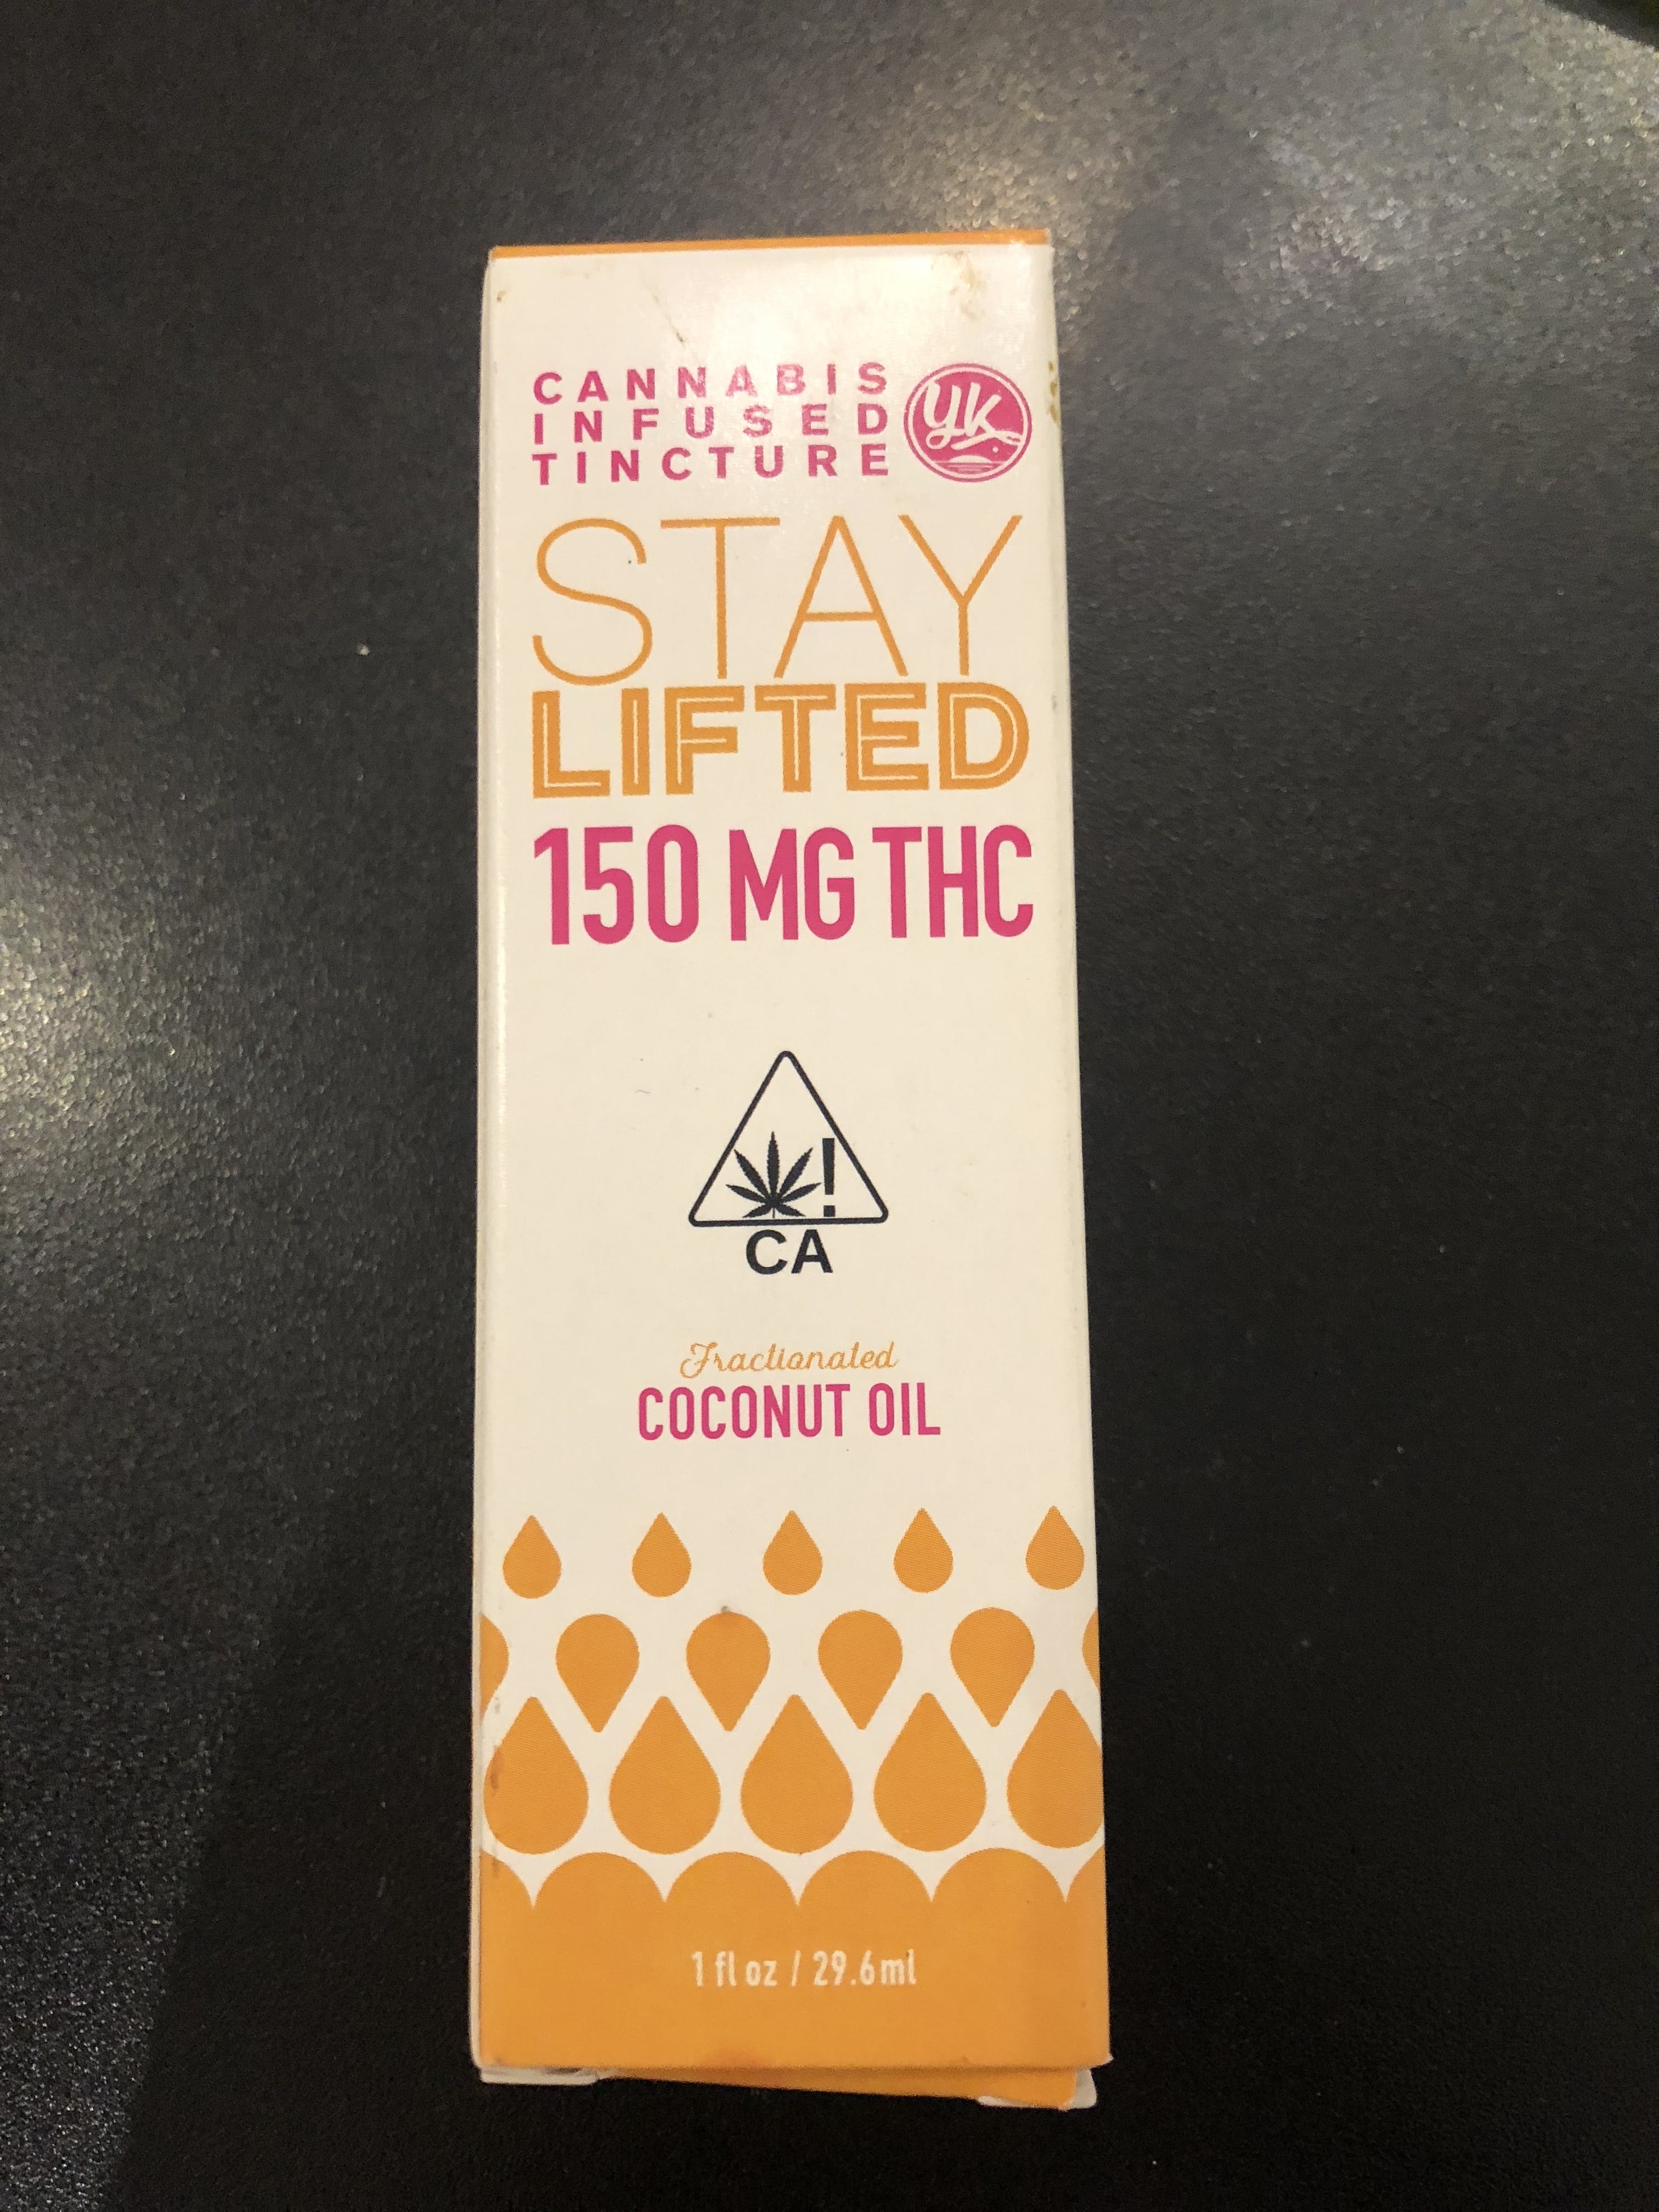 marijuana-dispensaries-call-for-address-lake-elsinore-stay-lifted-150-mg-coconut-oil